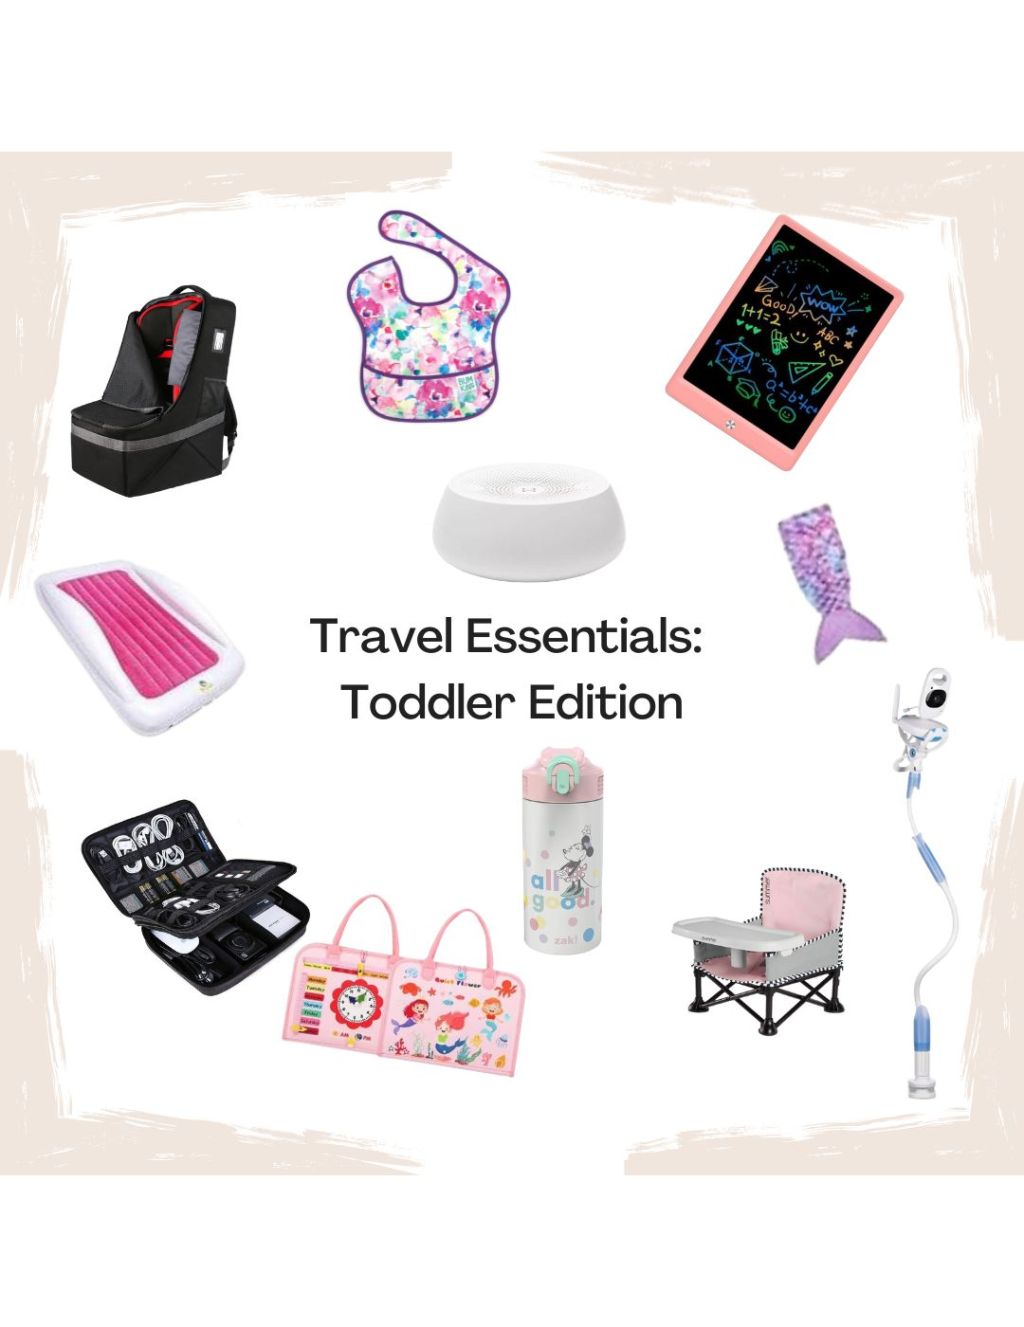 Travel Essentials for Toddlers